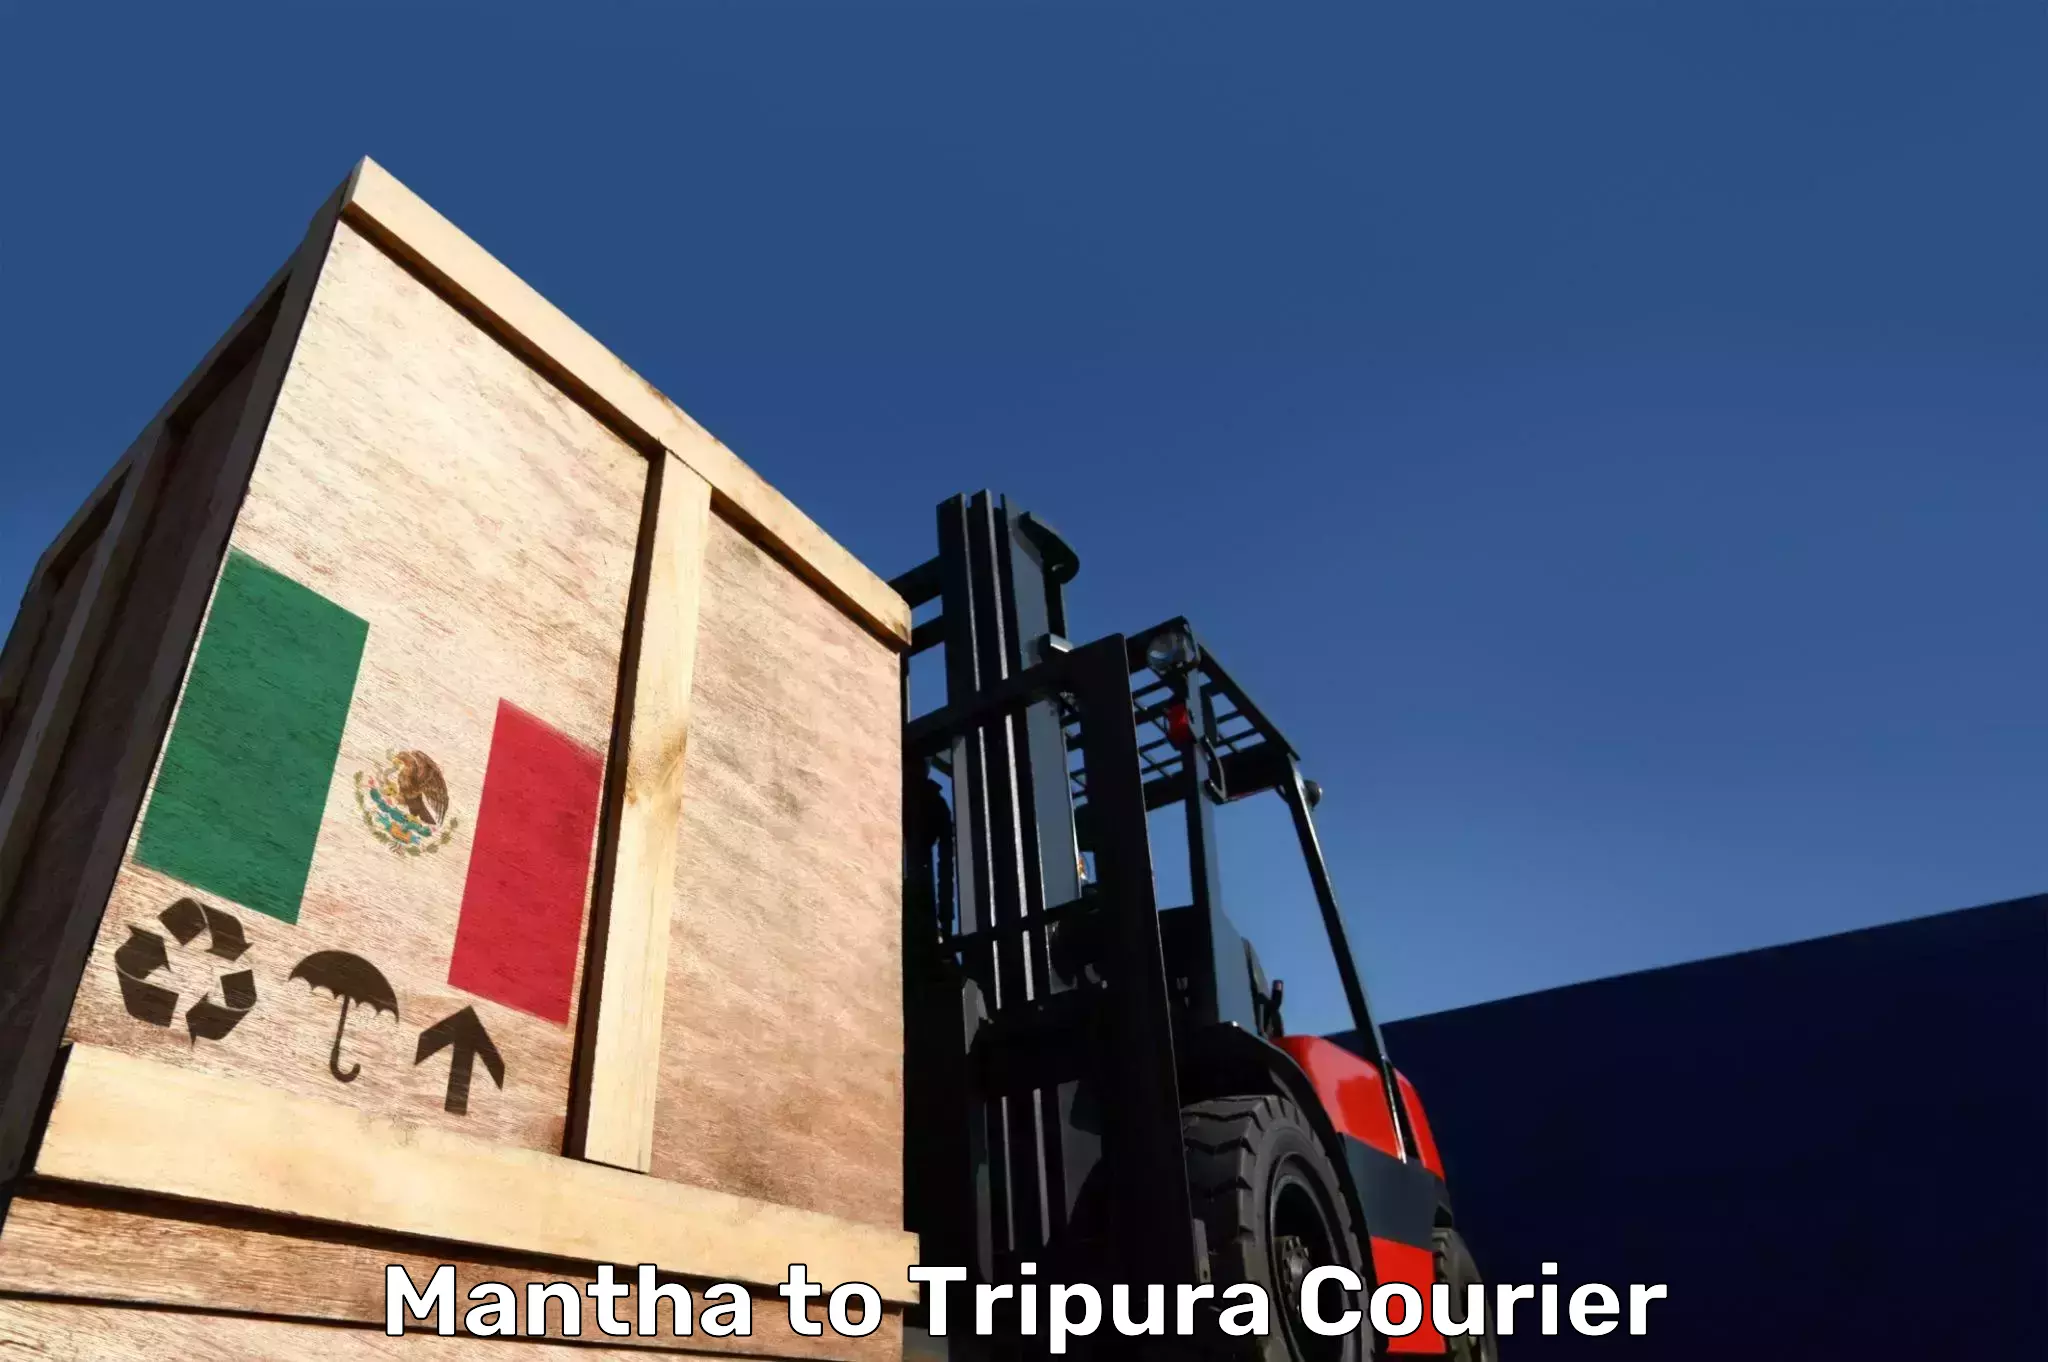 Online luggage shipping booking Mantha to Tripura